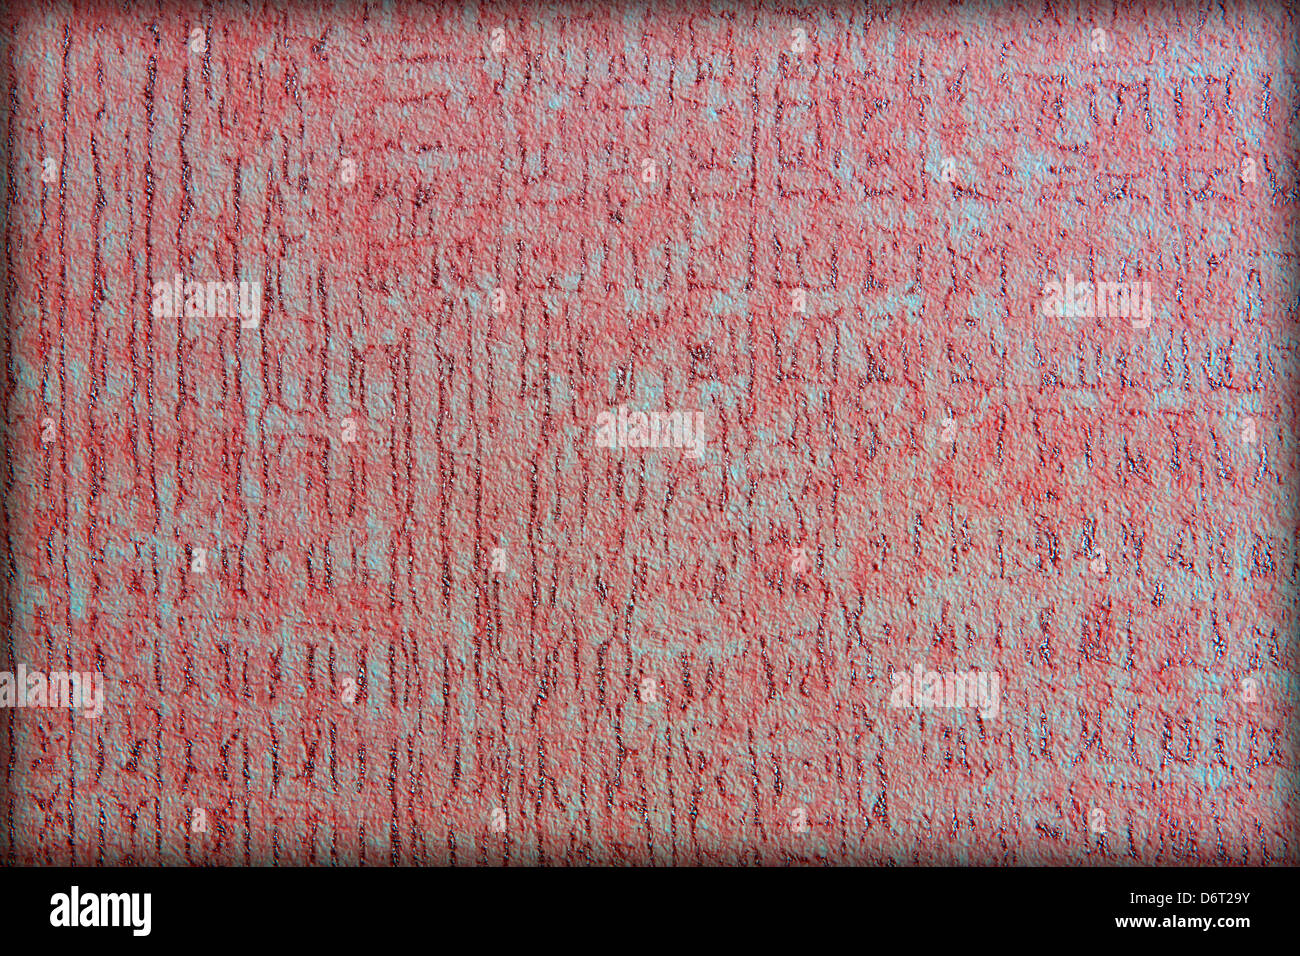 Wallpaper wall. Red fabric background information paradox. Stock Photo